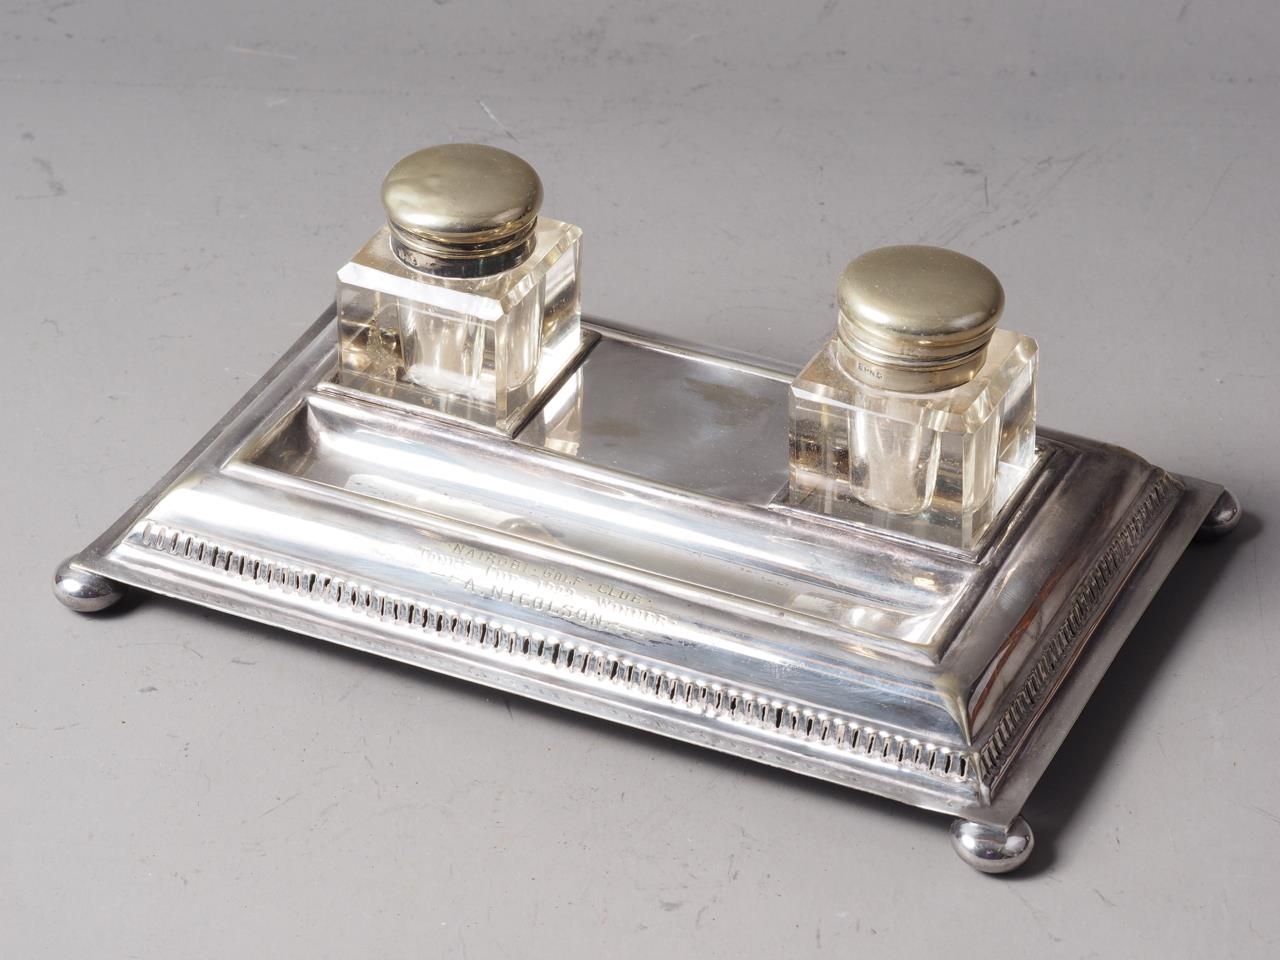 Three pairs of silver plated knife rests and a plated inkstand with inkwells